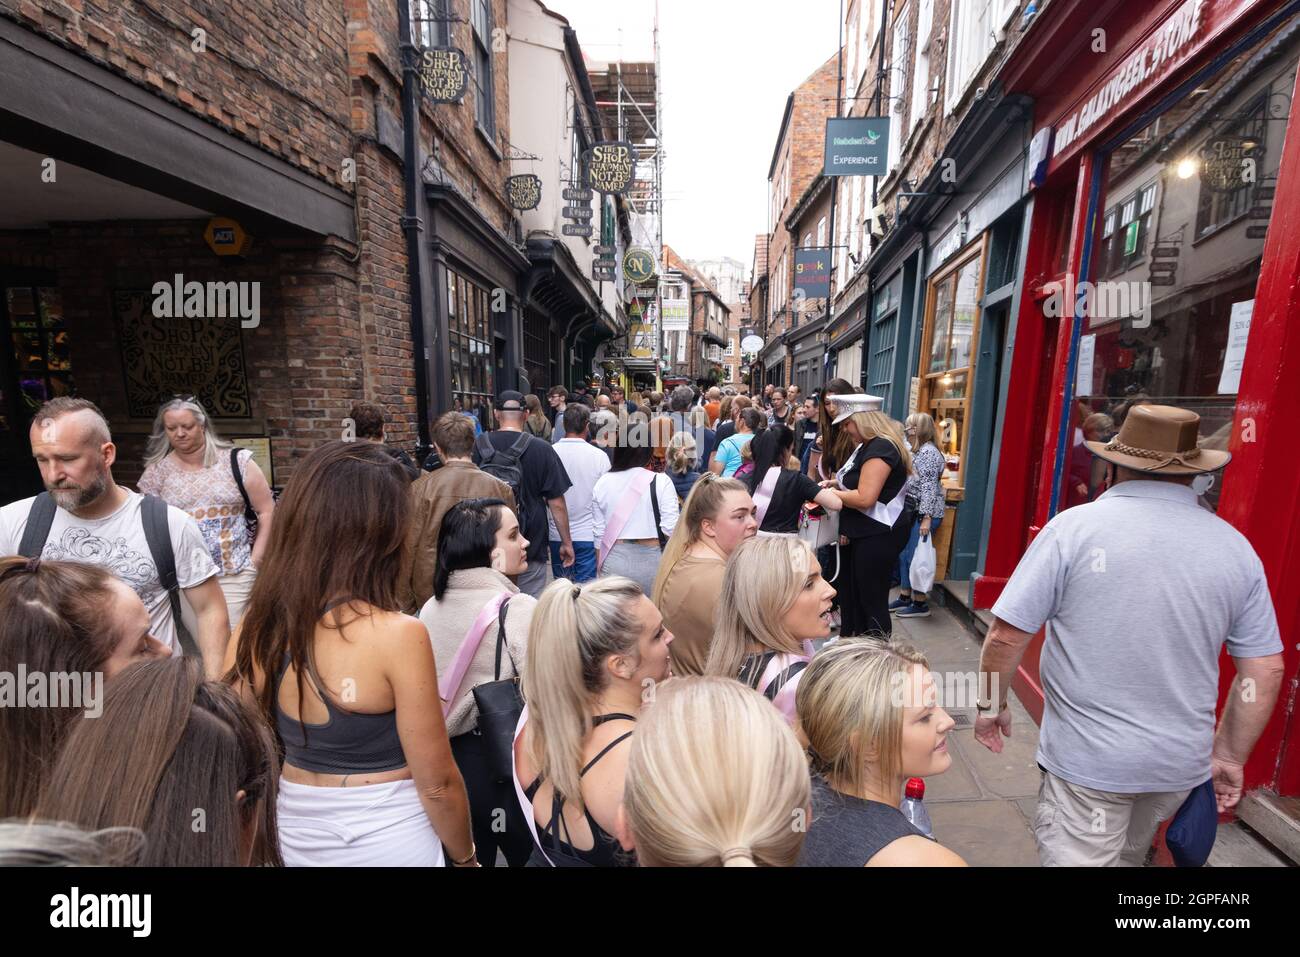 The Shambles, York UK; a medieval street crowded with a crowd of tourists, York city centre, York UK Stock Photo